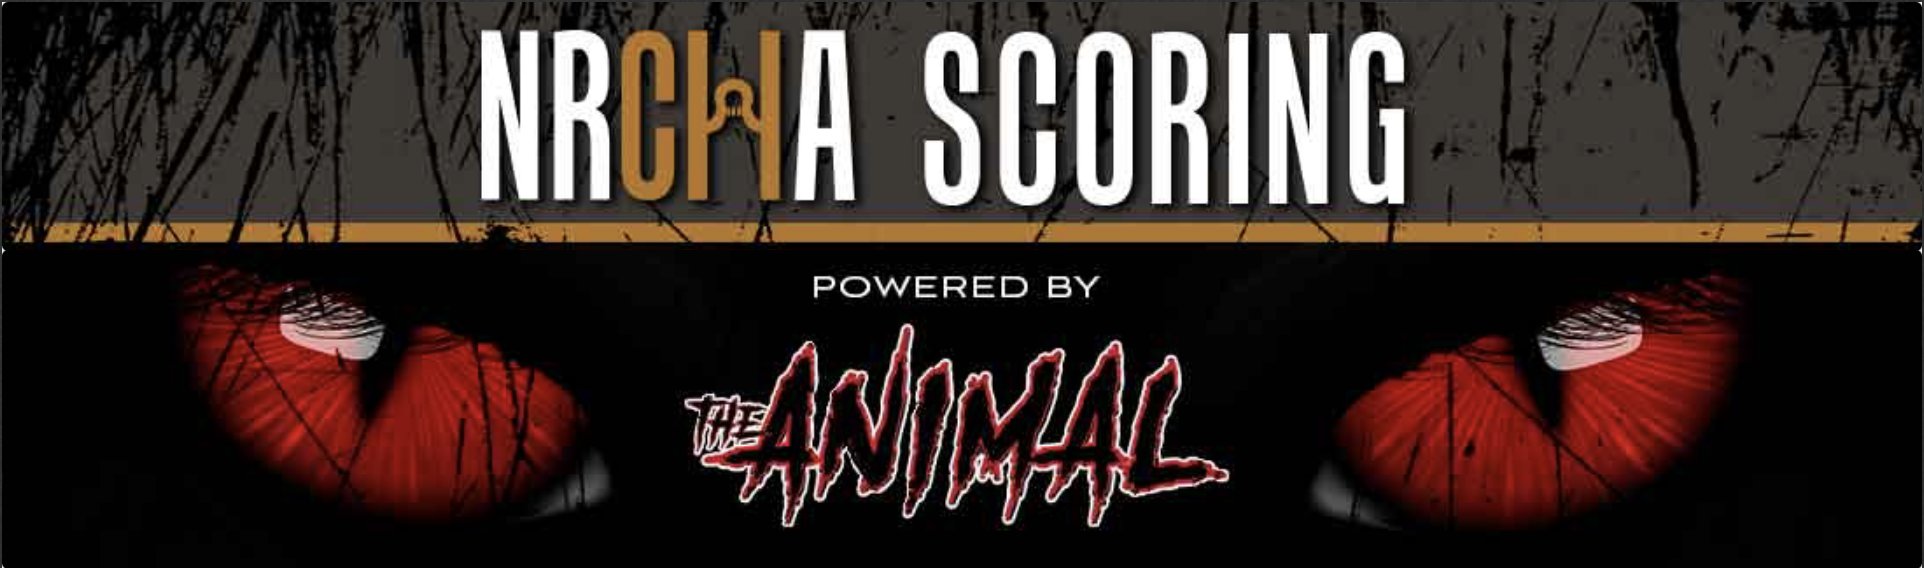 Featured image for “NRCHA SCORING BROUGHT TO YOU BY THE ANIMAL”